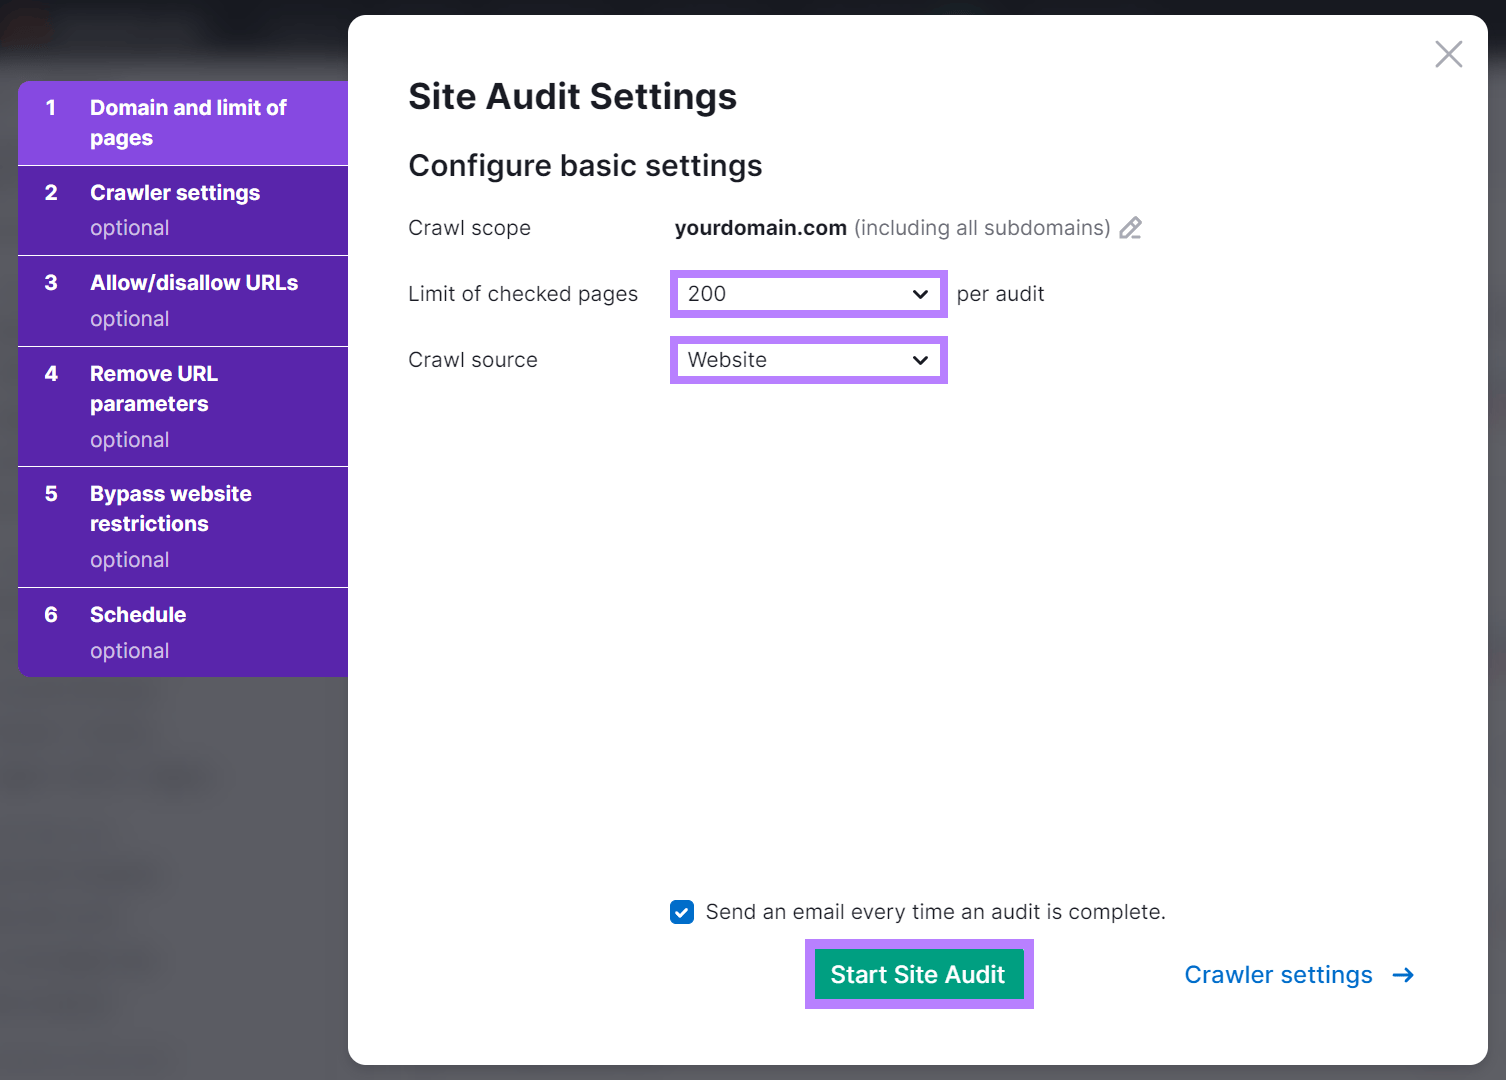 Site Audit settings configuration modal with page limits, crawl source, and 'Start Site Audit' button highlighted.